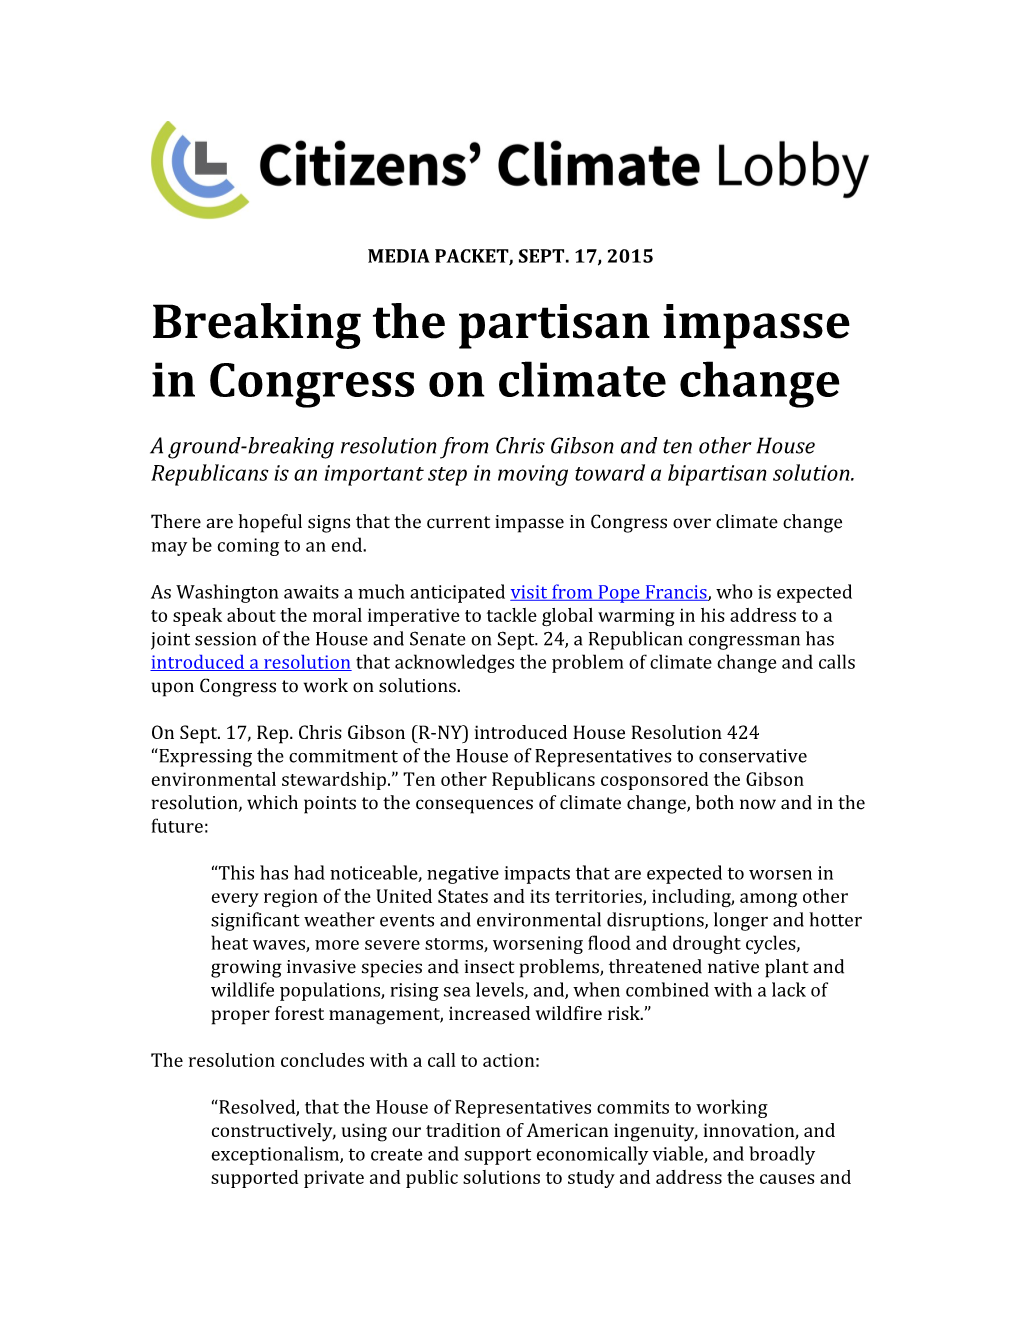 Breaking the Partisan Impasse in Congress on Climate Change